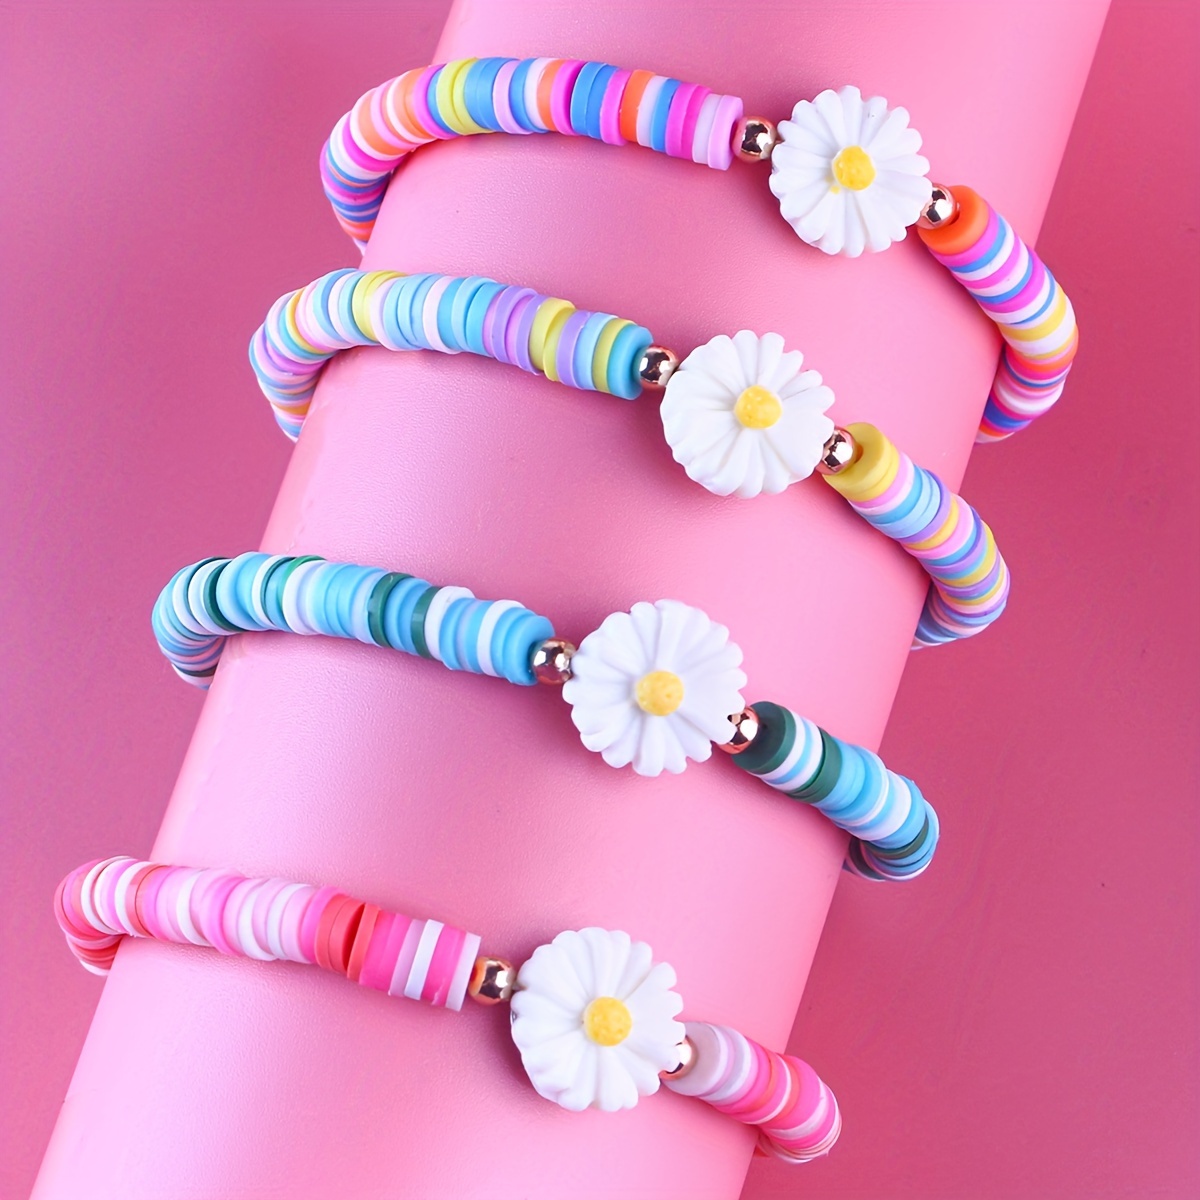 480PCS Fruit Flower Polymer Clay Beads, 24 Style Cute Smiley Heart Mushroom  Clay Beads Charms For Jewelry Necklace Earring Making, DIY Bracelet Making